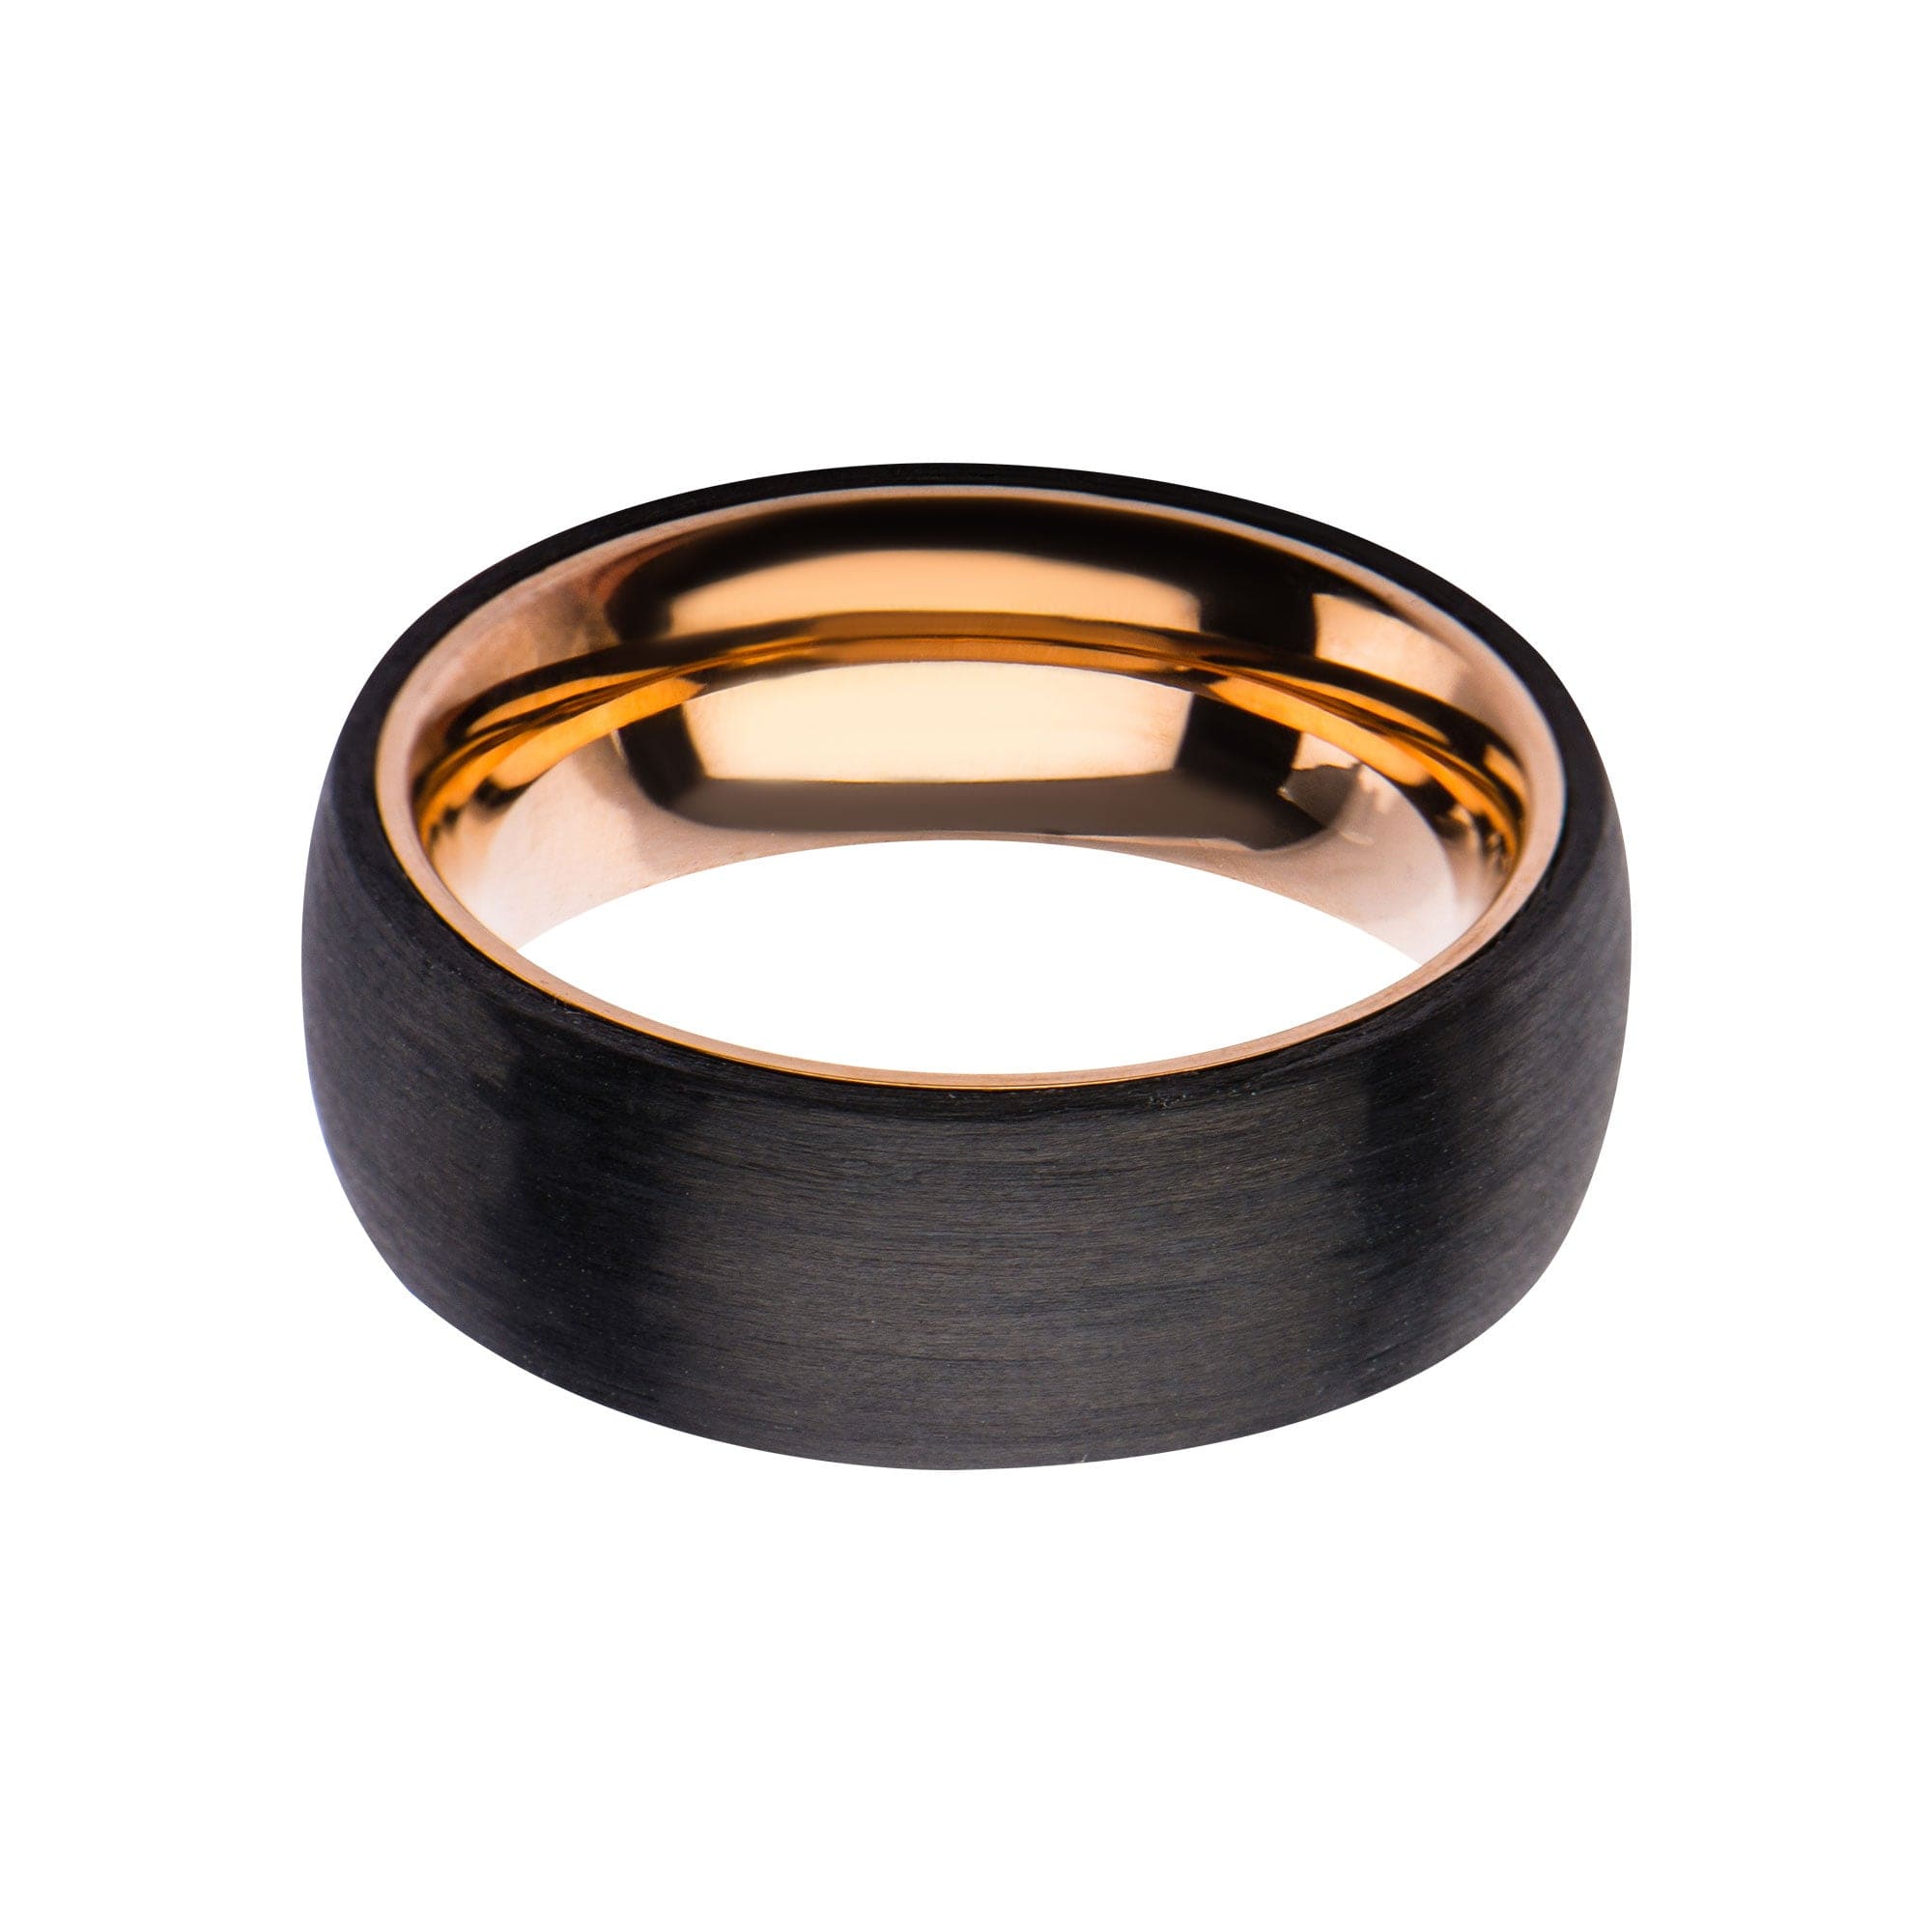 INOX JEWELRY Rings Rose Tone Stainless Steel Solid Carved Black Carbon Graphite Band Ring